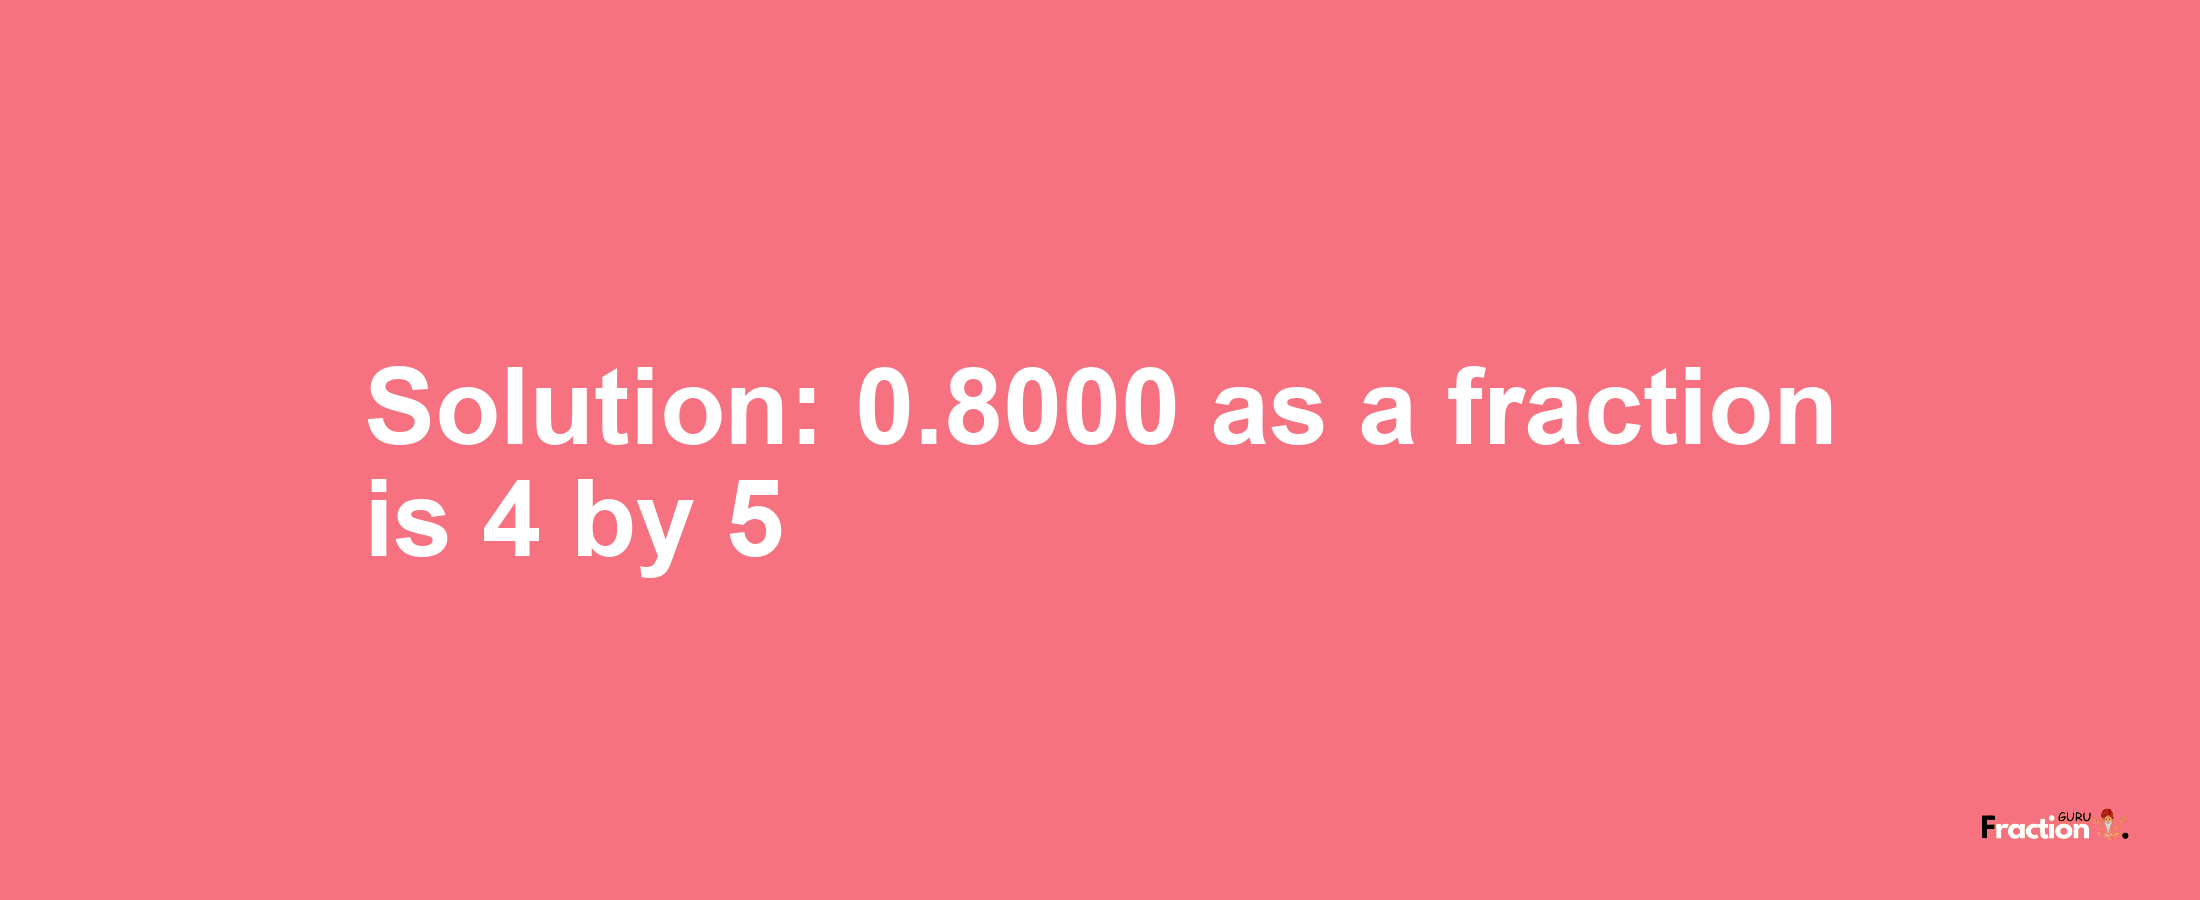 Solution:0.8000 as a fraction is 4/5